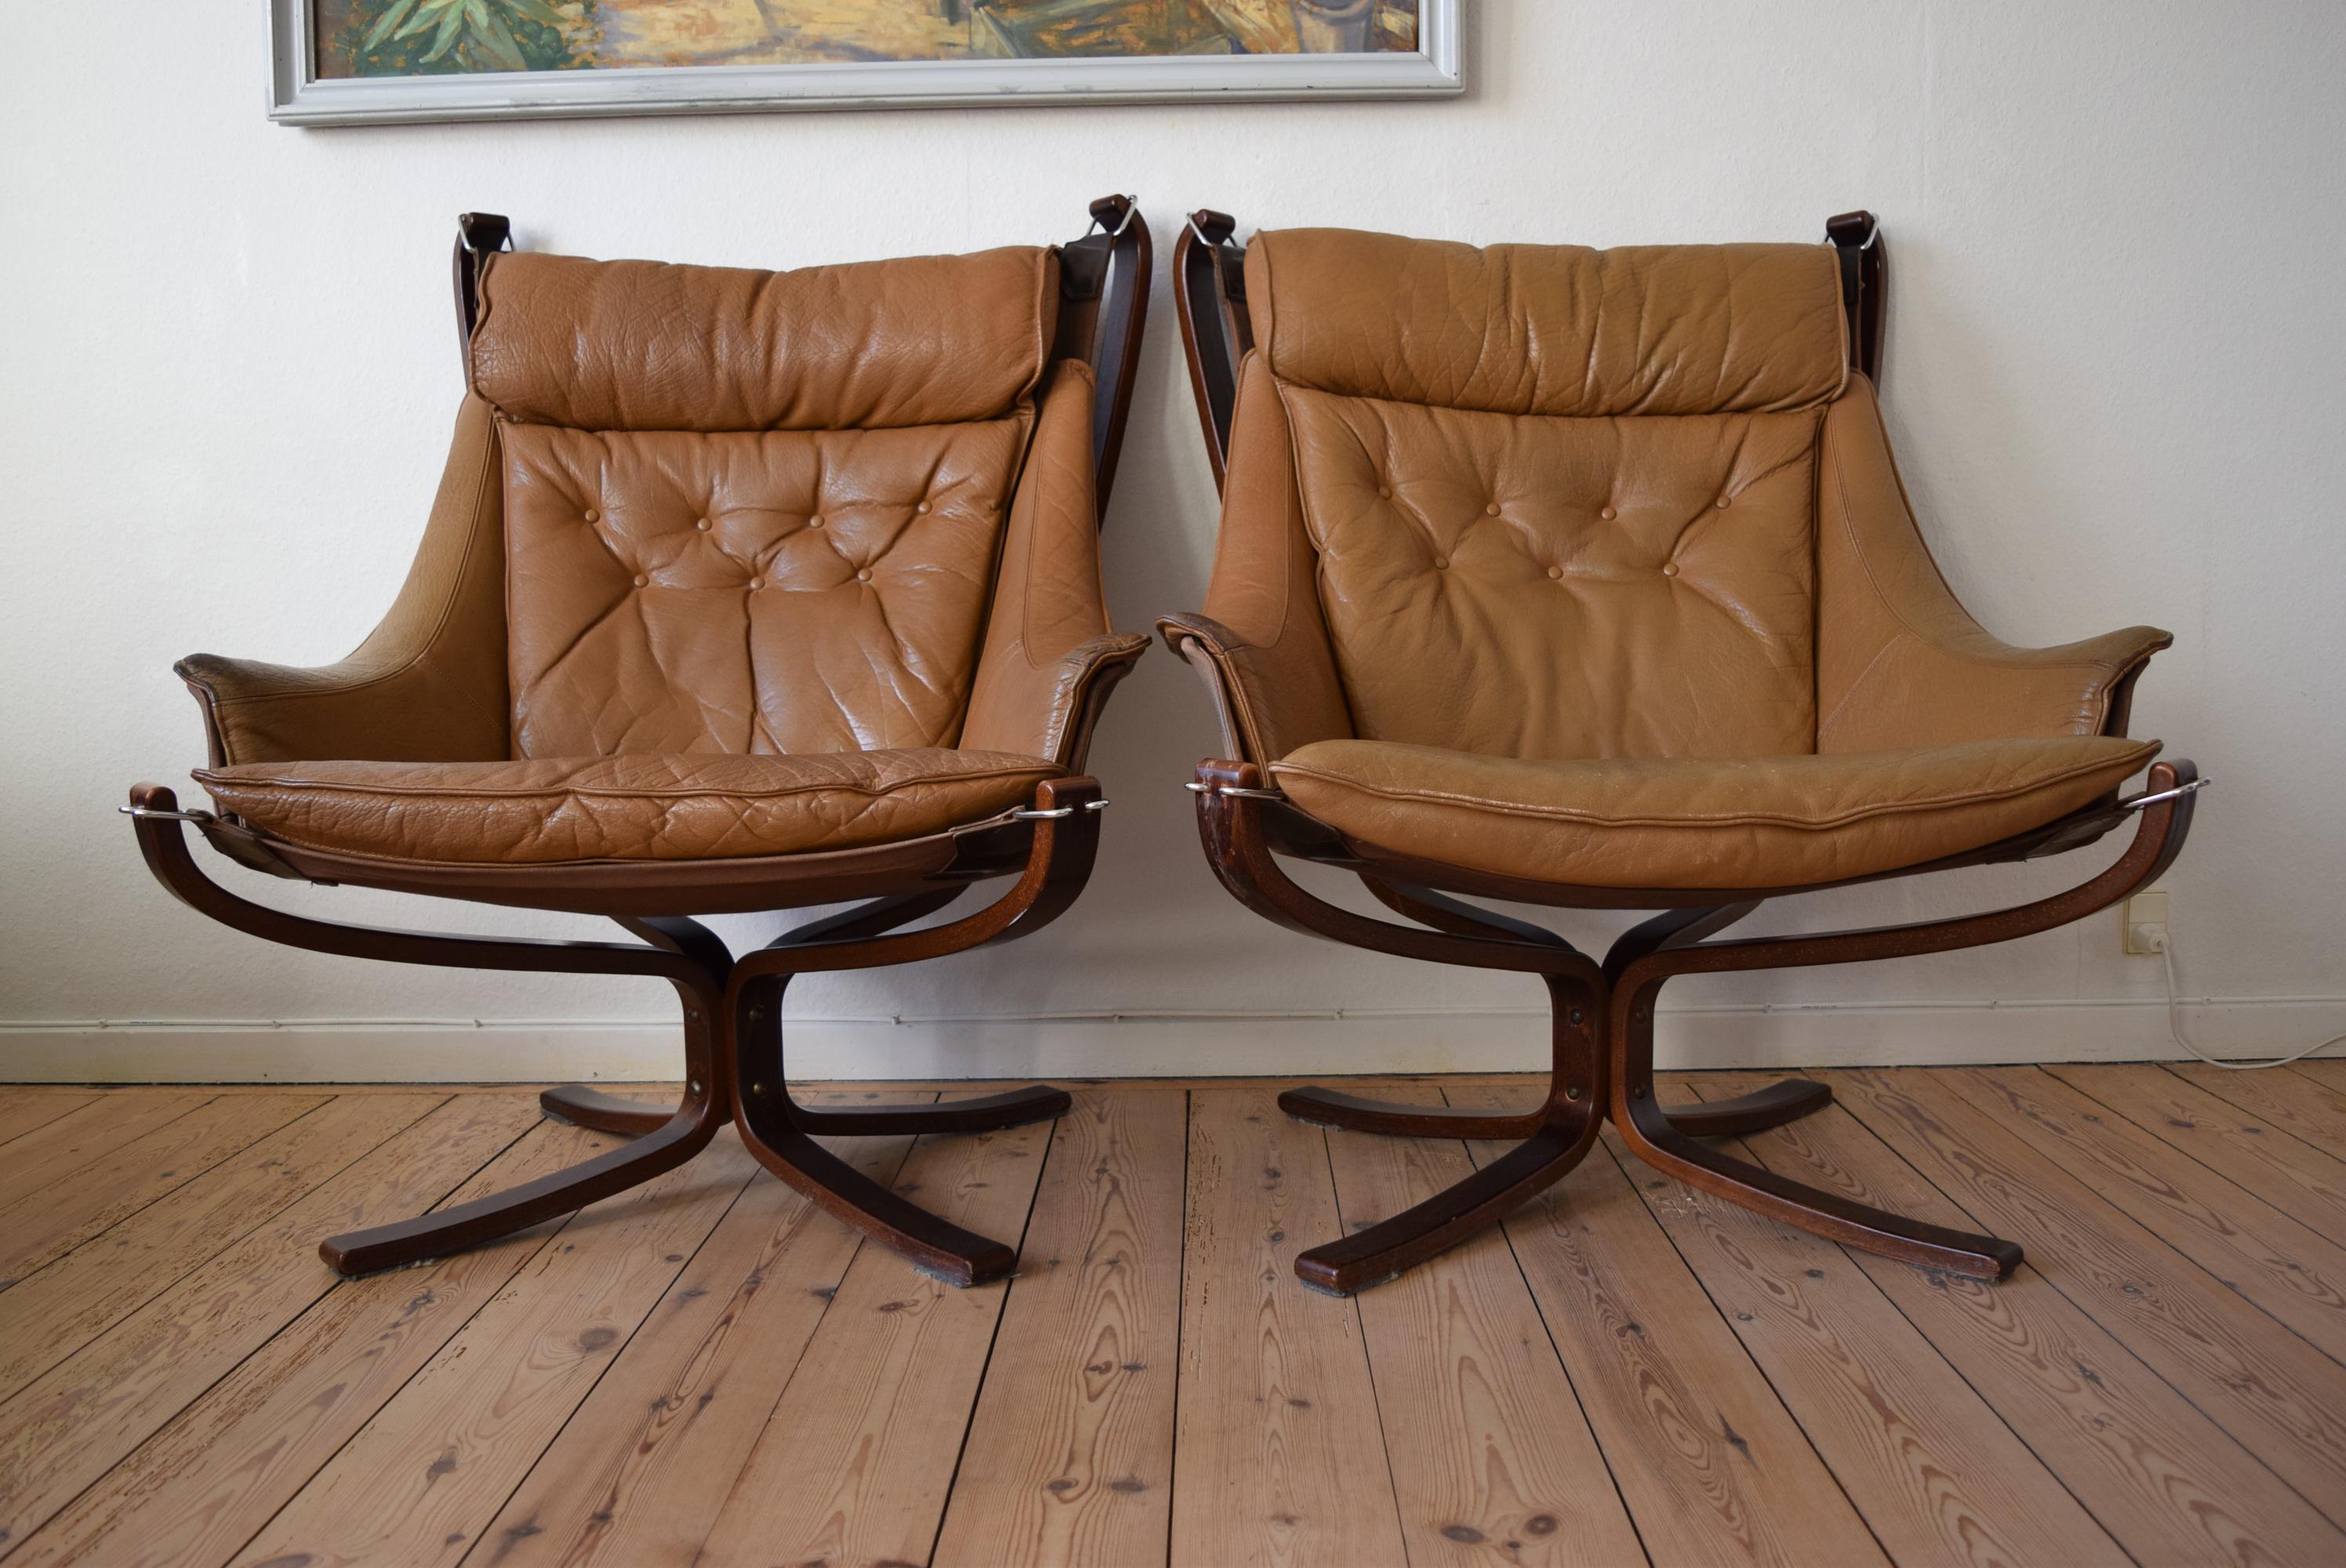 This pair of winged ‘Falcon' lounge chairs were designed by Sigurd Resell during the 1970s and were produced by Vatne Møbler, Norway. In a very good vintage condition, the pieces are made with light tan leather cushions on a bentwood frame, and hang